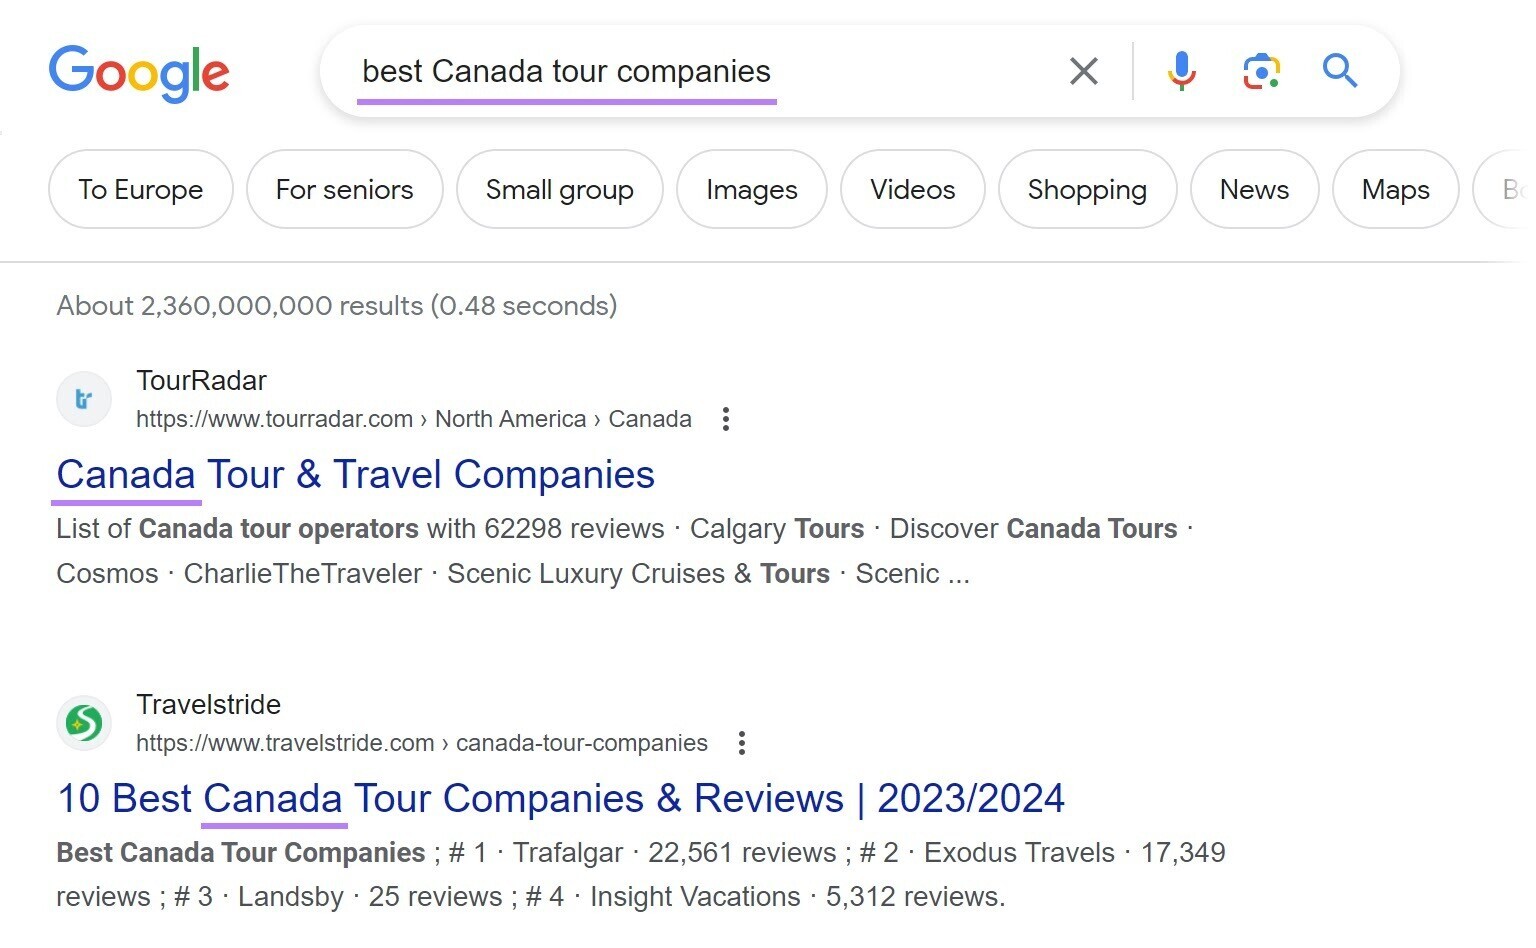 "best Canada tour companies" query in Google